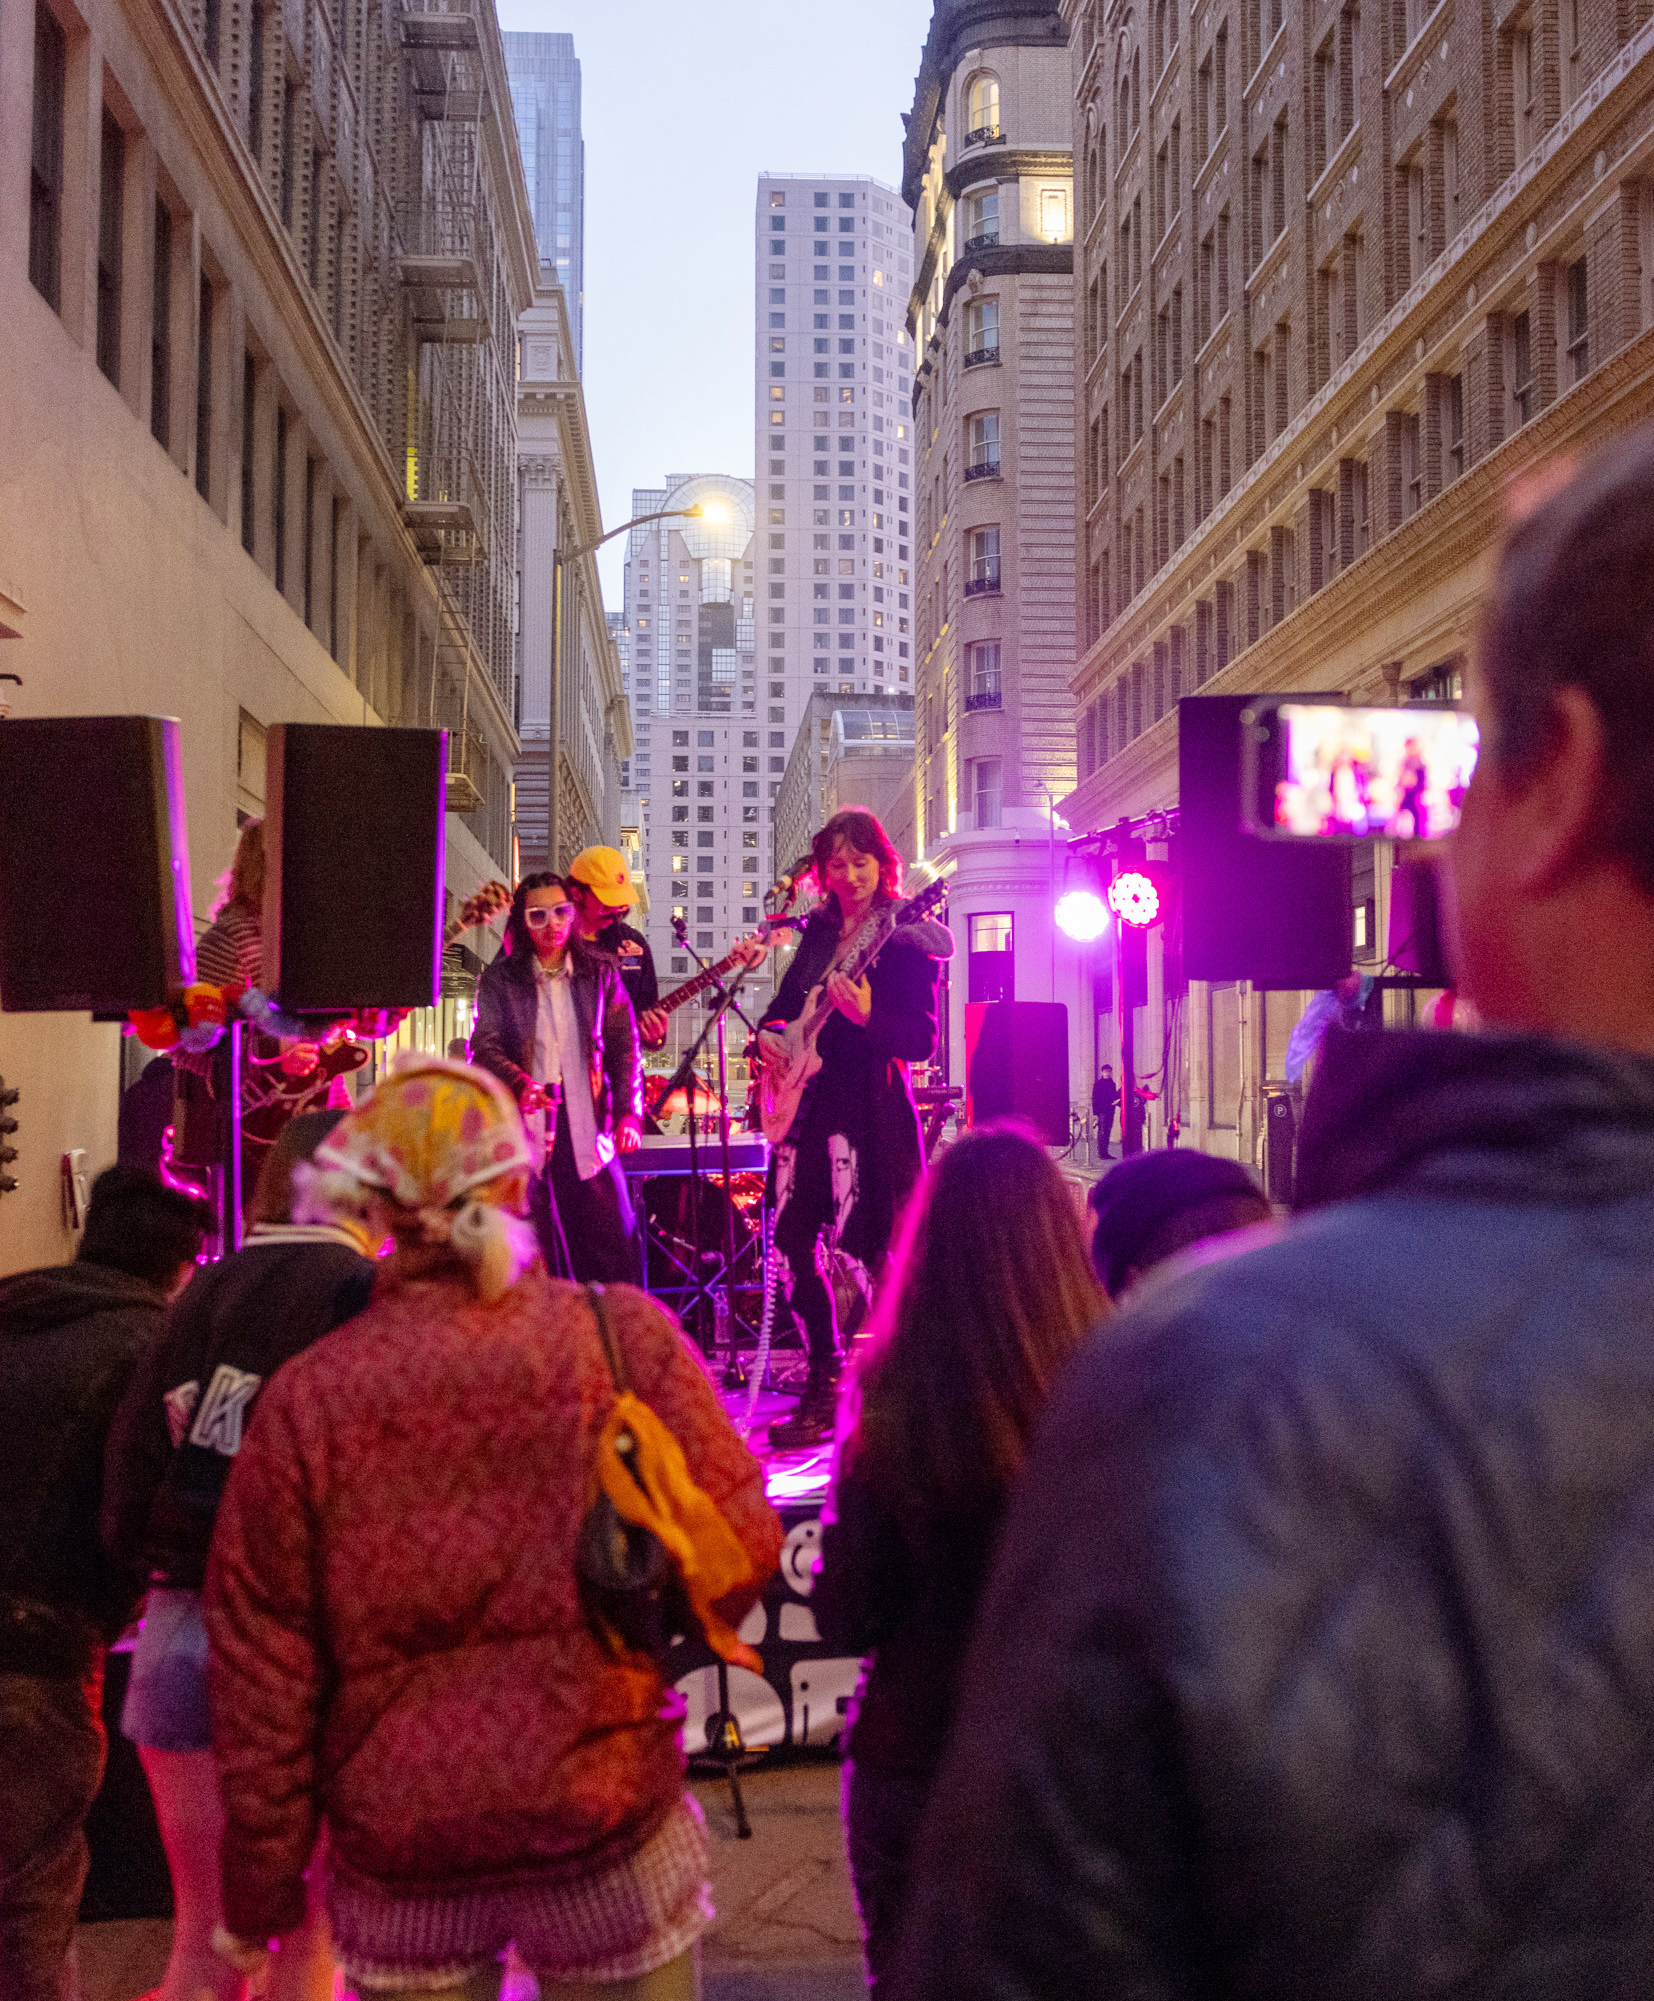 This image shows a street concert with four musicians performing, surrounded by tall buildings. Several people are watching, including someone filming with a smartphone.